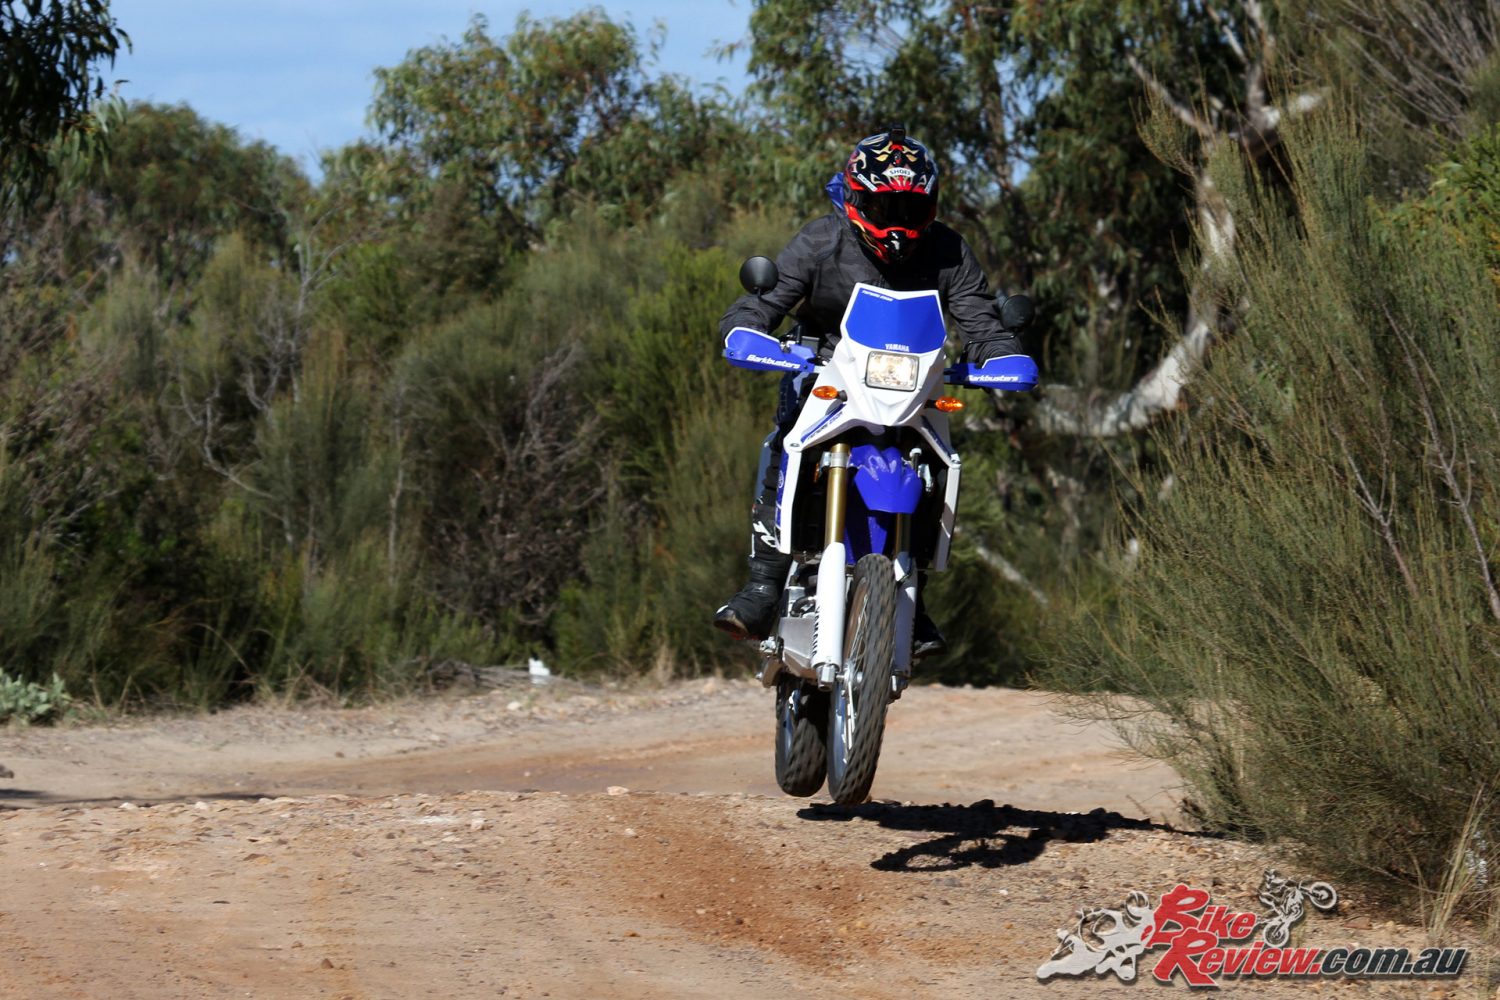 Kris catching a bit of air on our new Project WR250R